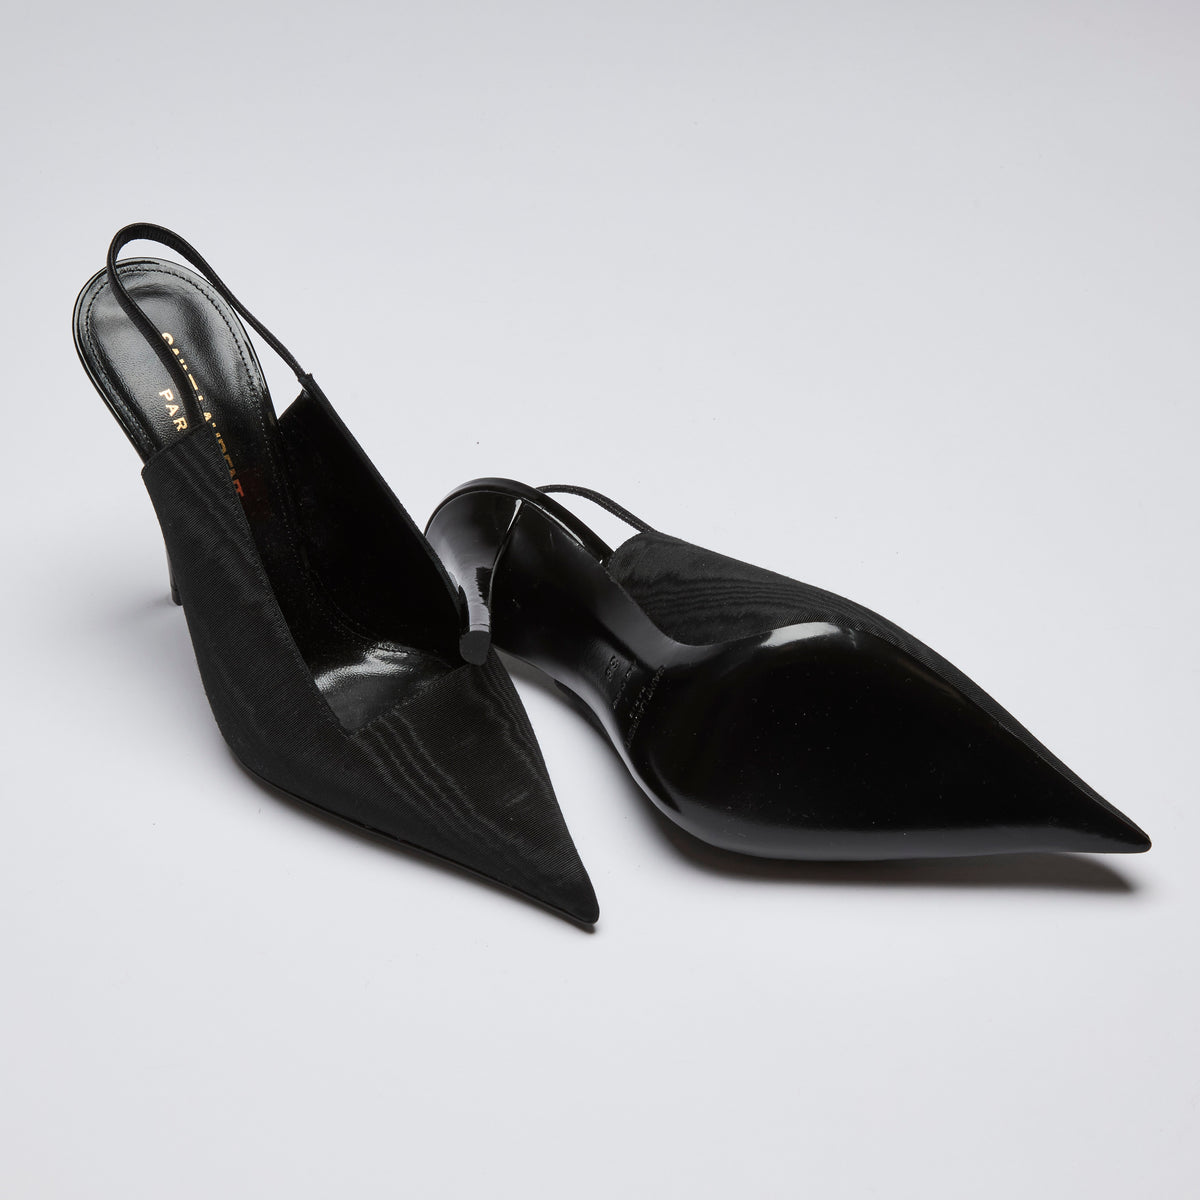 Excellent Pre-Loved Black Fabric Point Toe Sling Back Heels with Square Cut Out. (bottom)